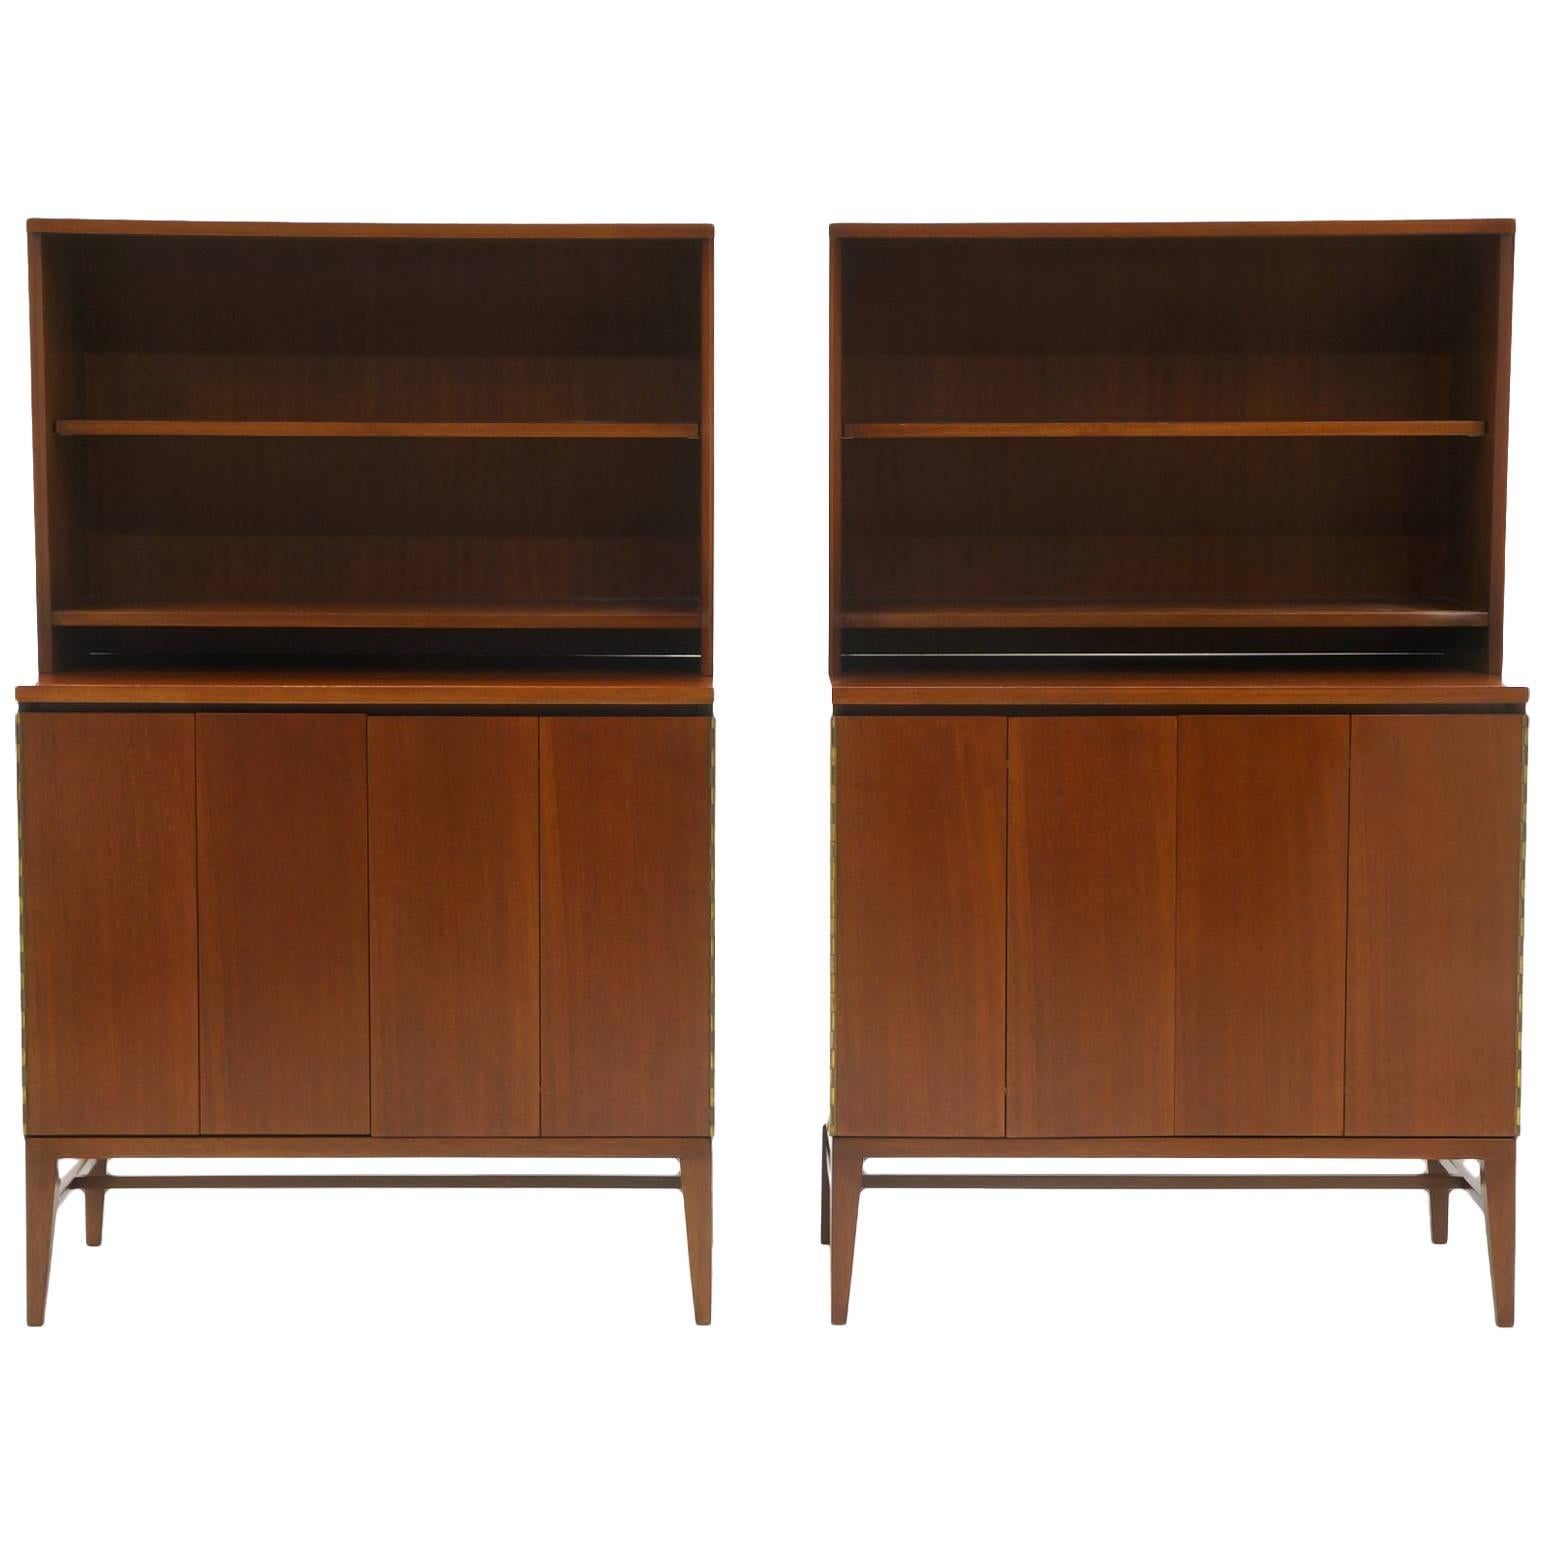 Pair of Paul McCobb Storage Cabinets for Use with or Without the Top Section